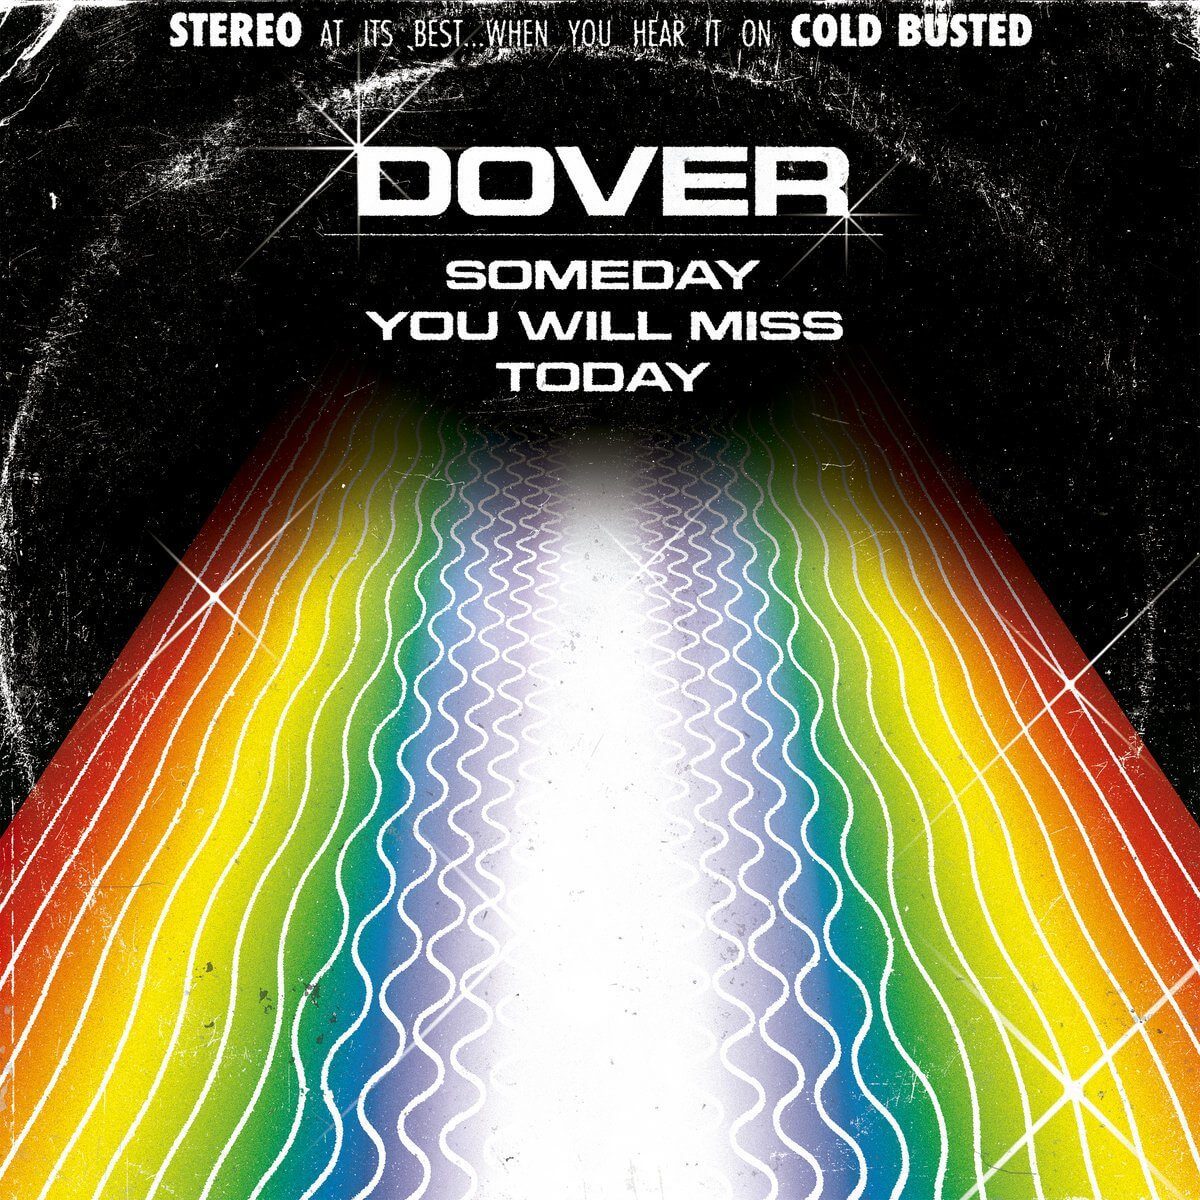 Dover - Someday You Will Miss Today - Limited Edition 12 Inch Vinyl - Cold Busted